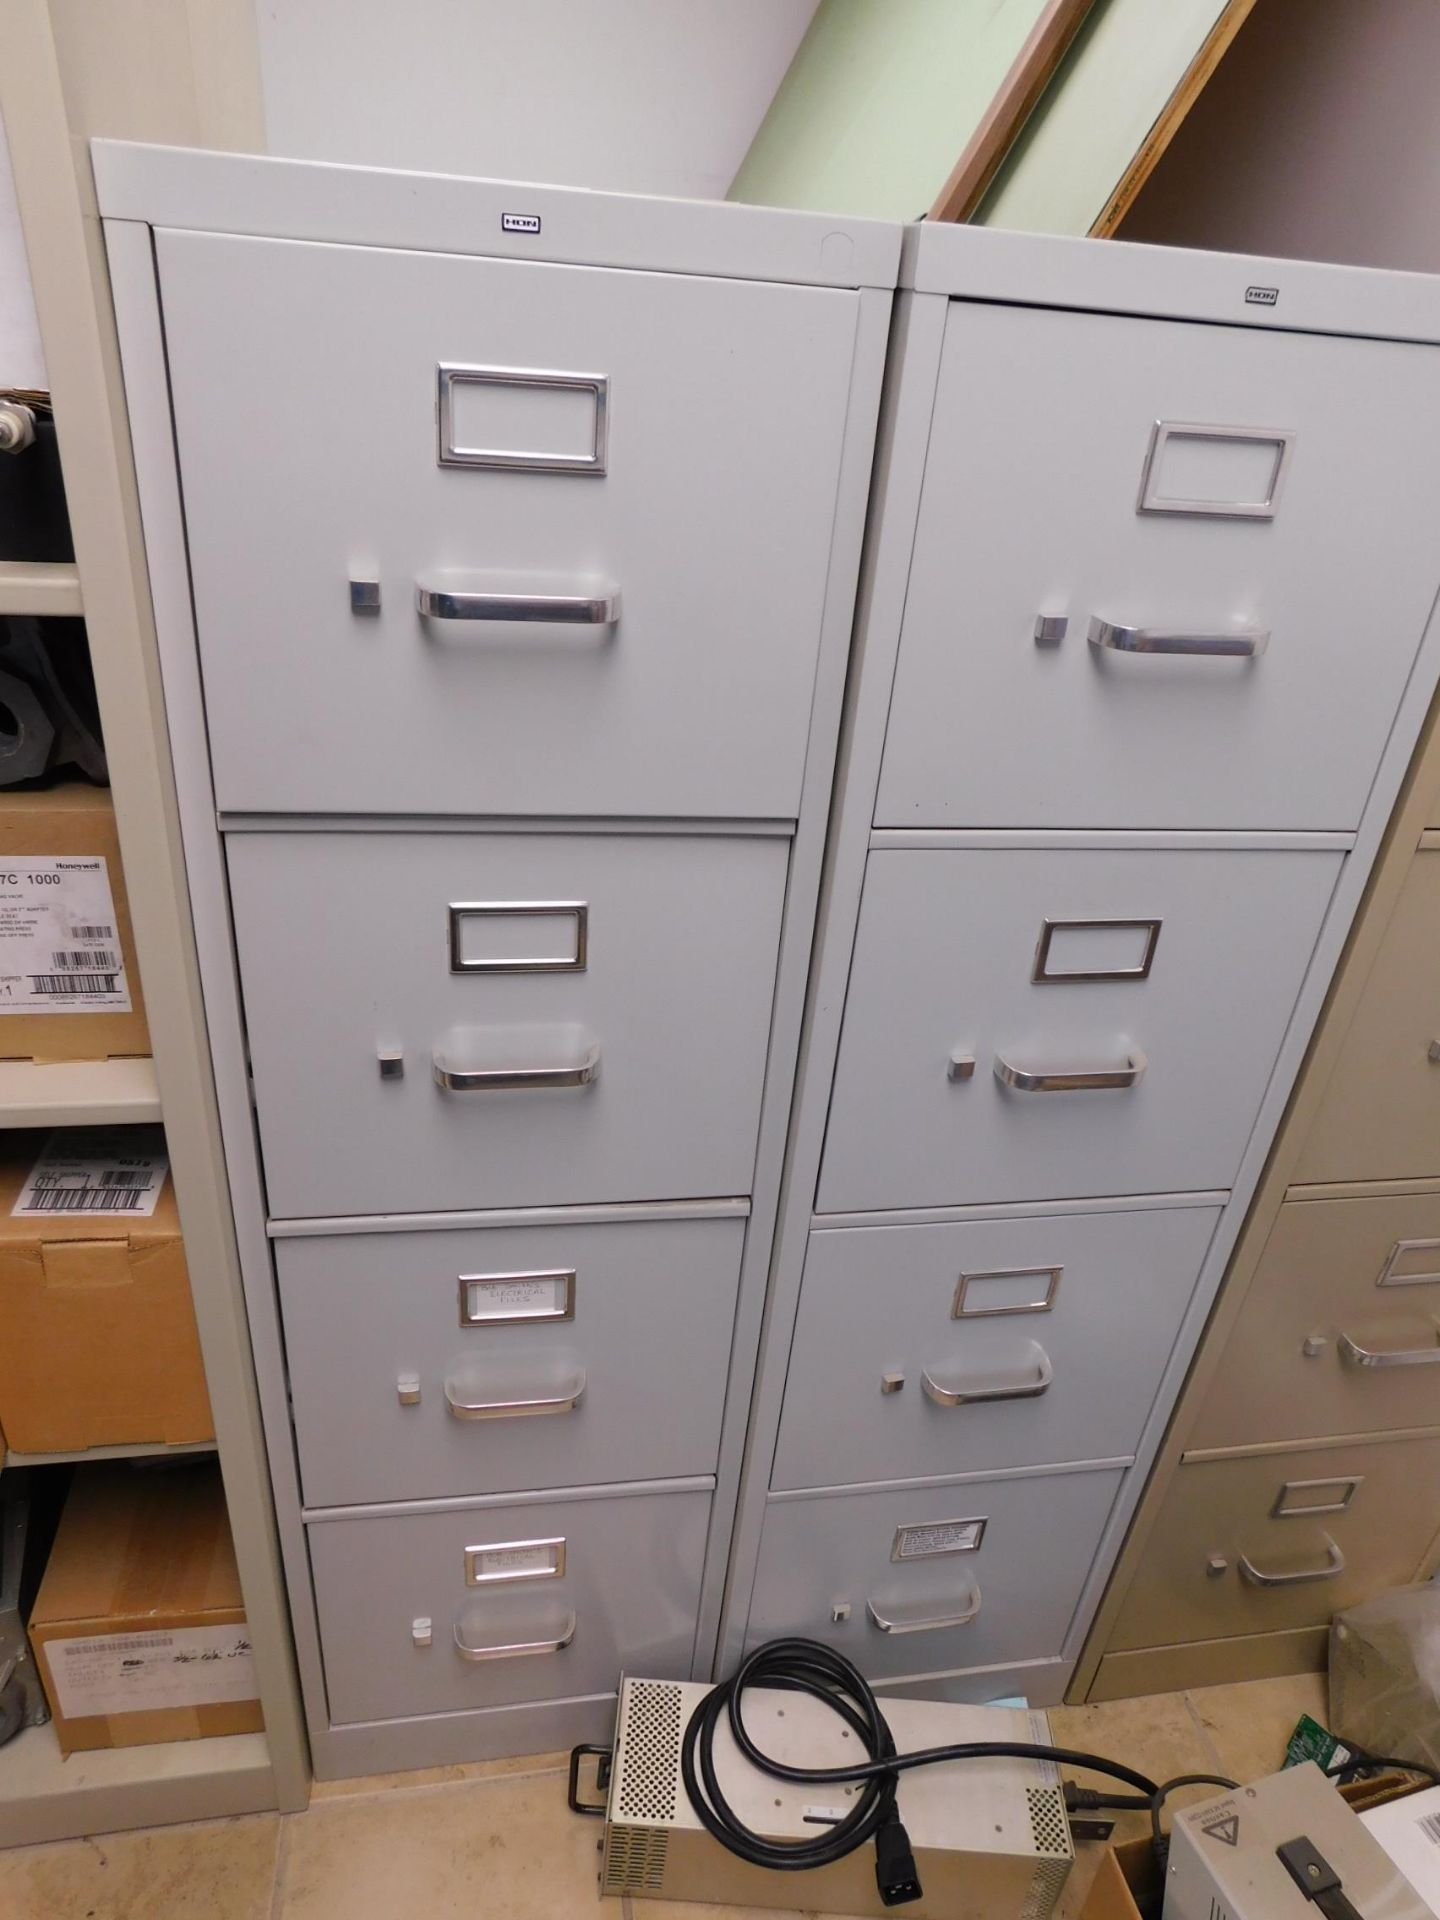 (2) 4-Drawer File Cabinets and (3) Metal Bookshelves